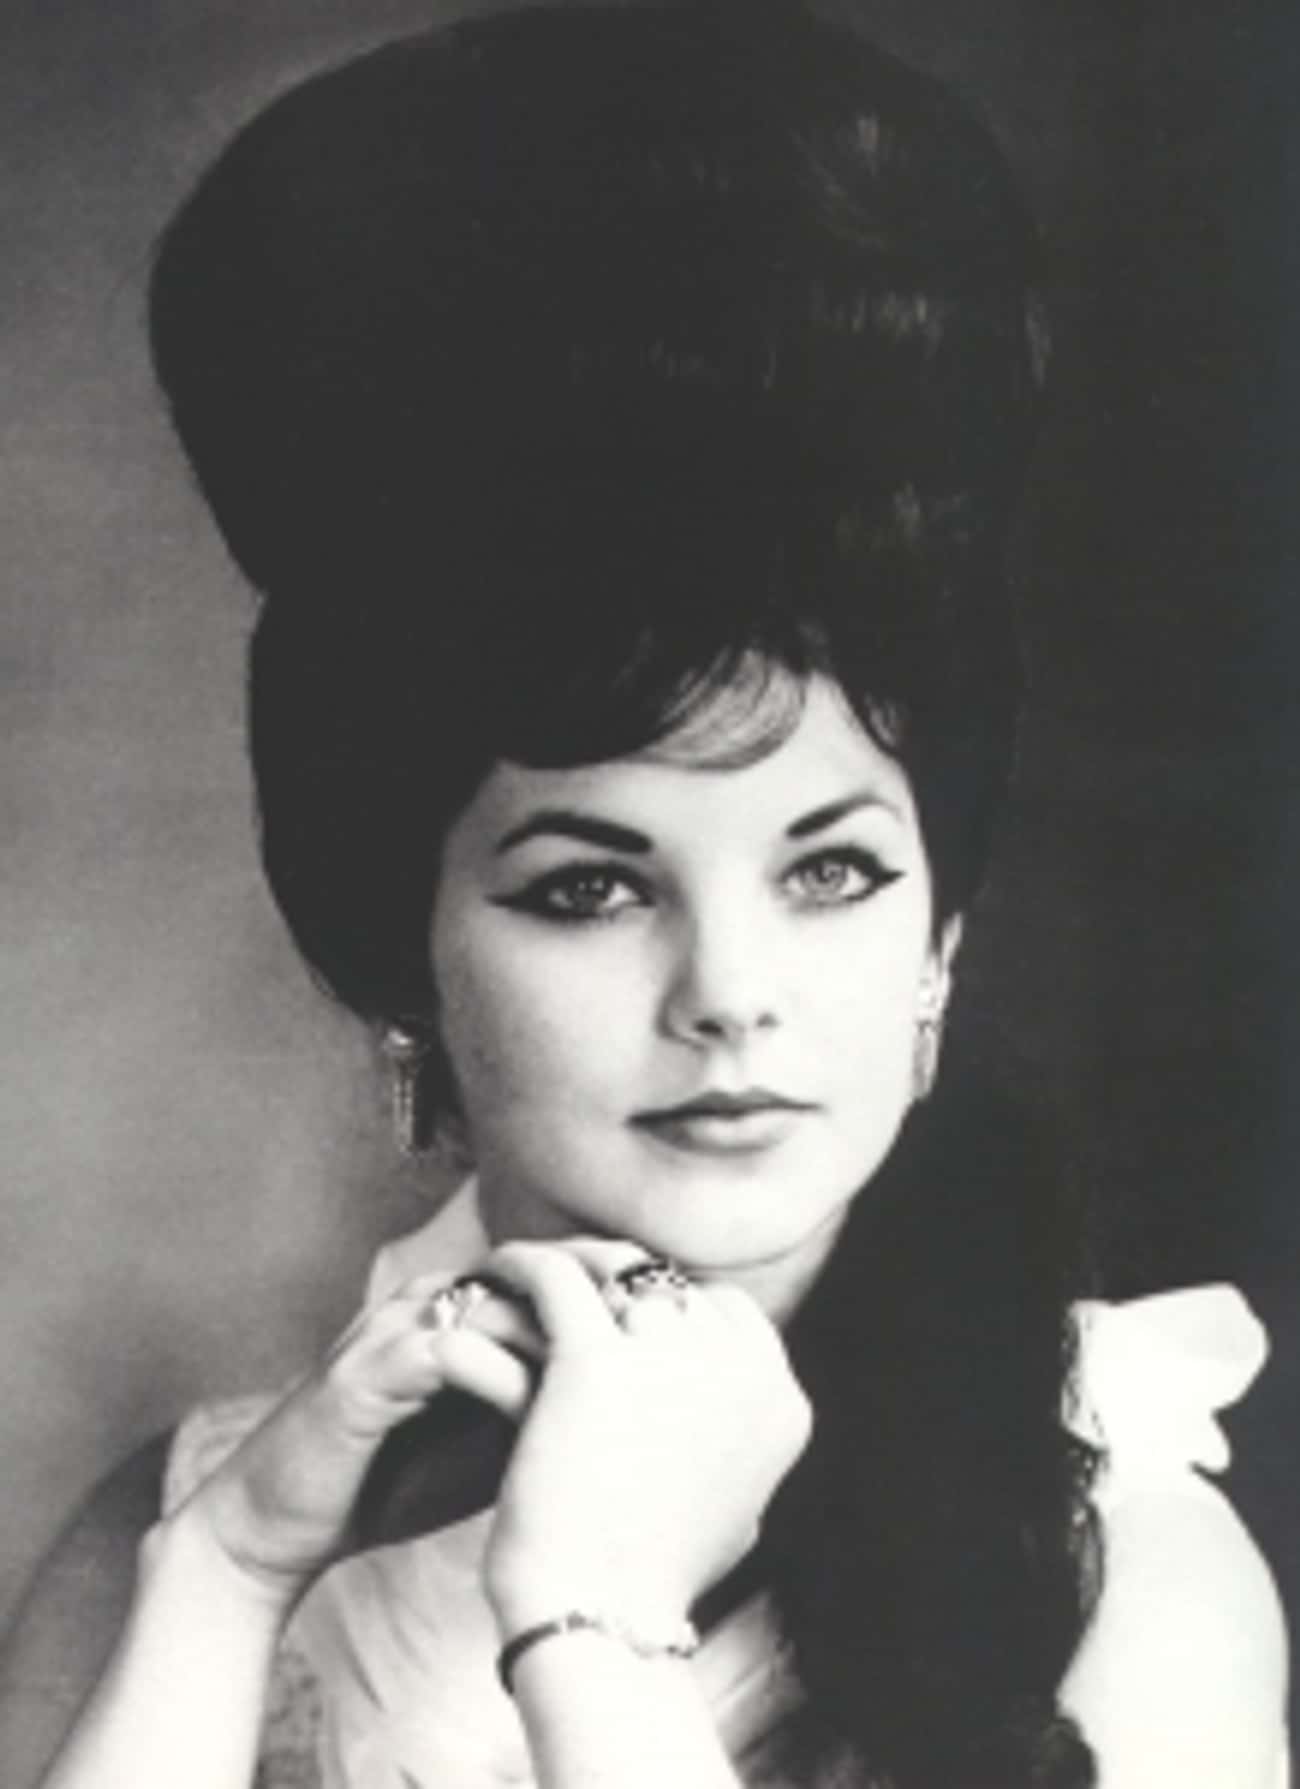 Young Priscilla Presley in a White Blouse with a Beehive